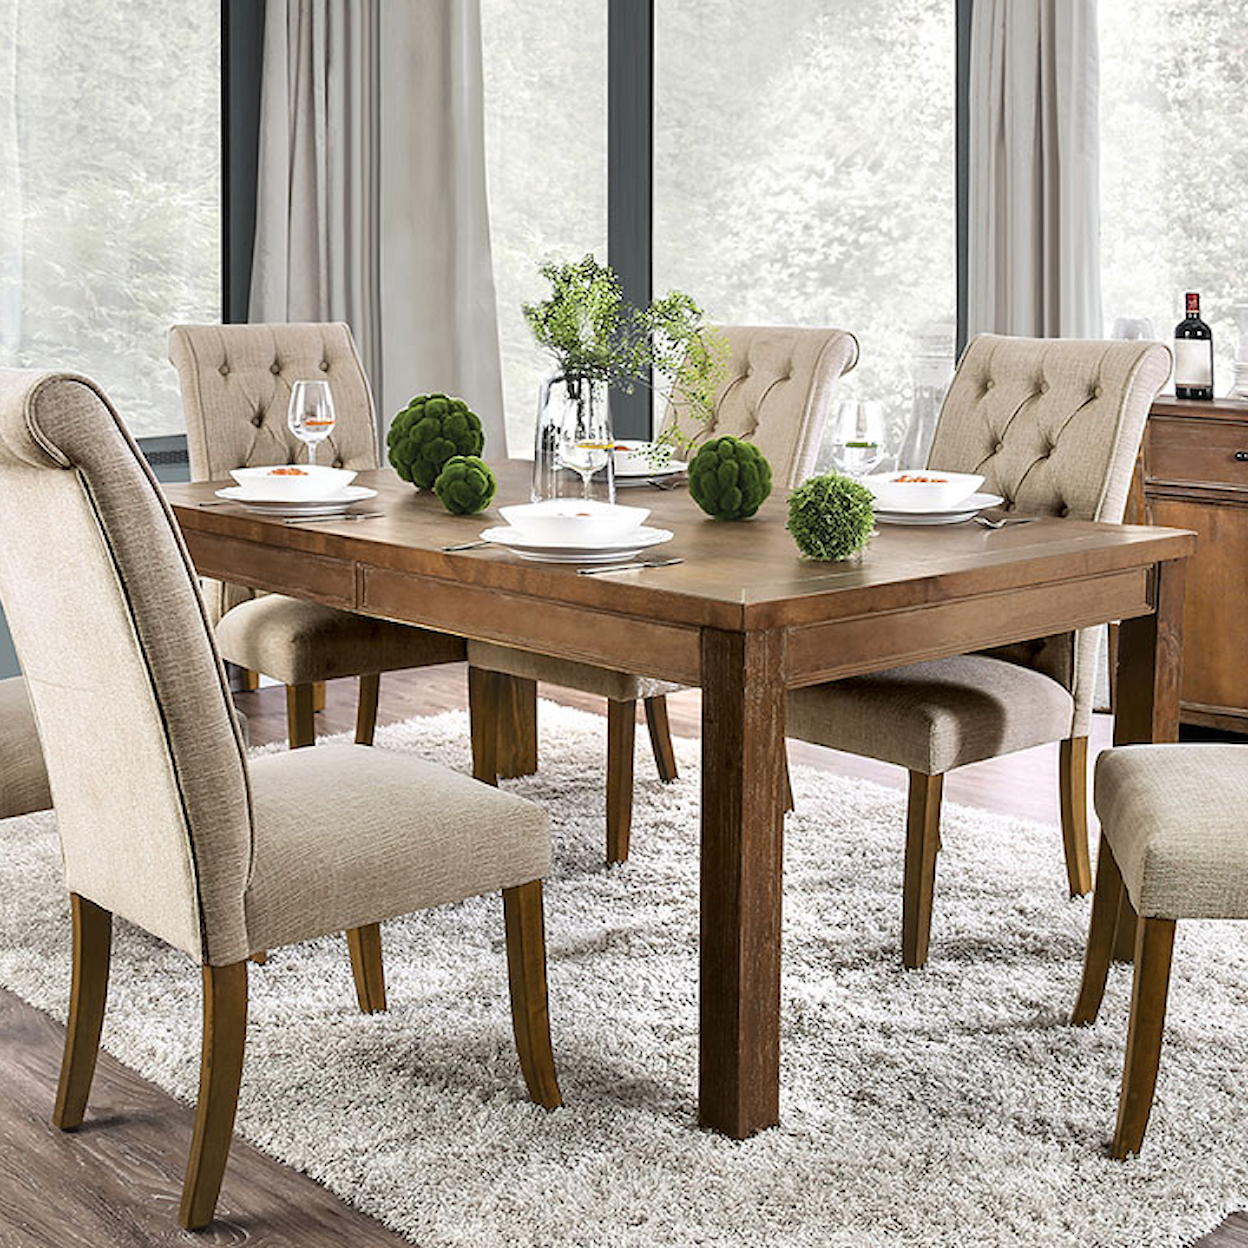 Furniture of America Sania Dining Table